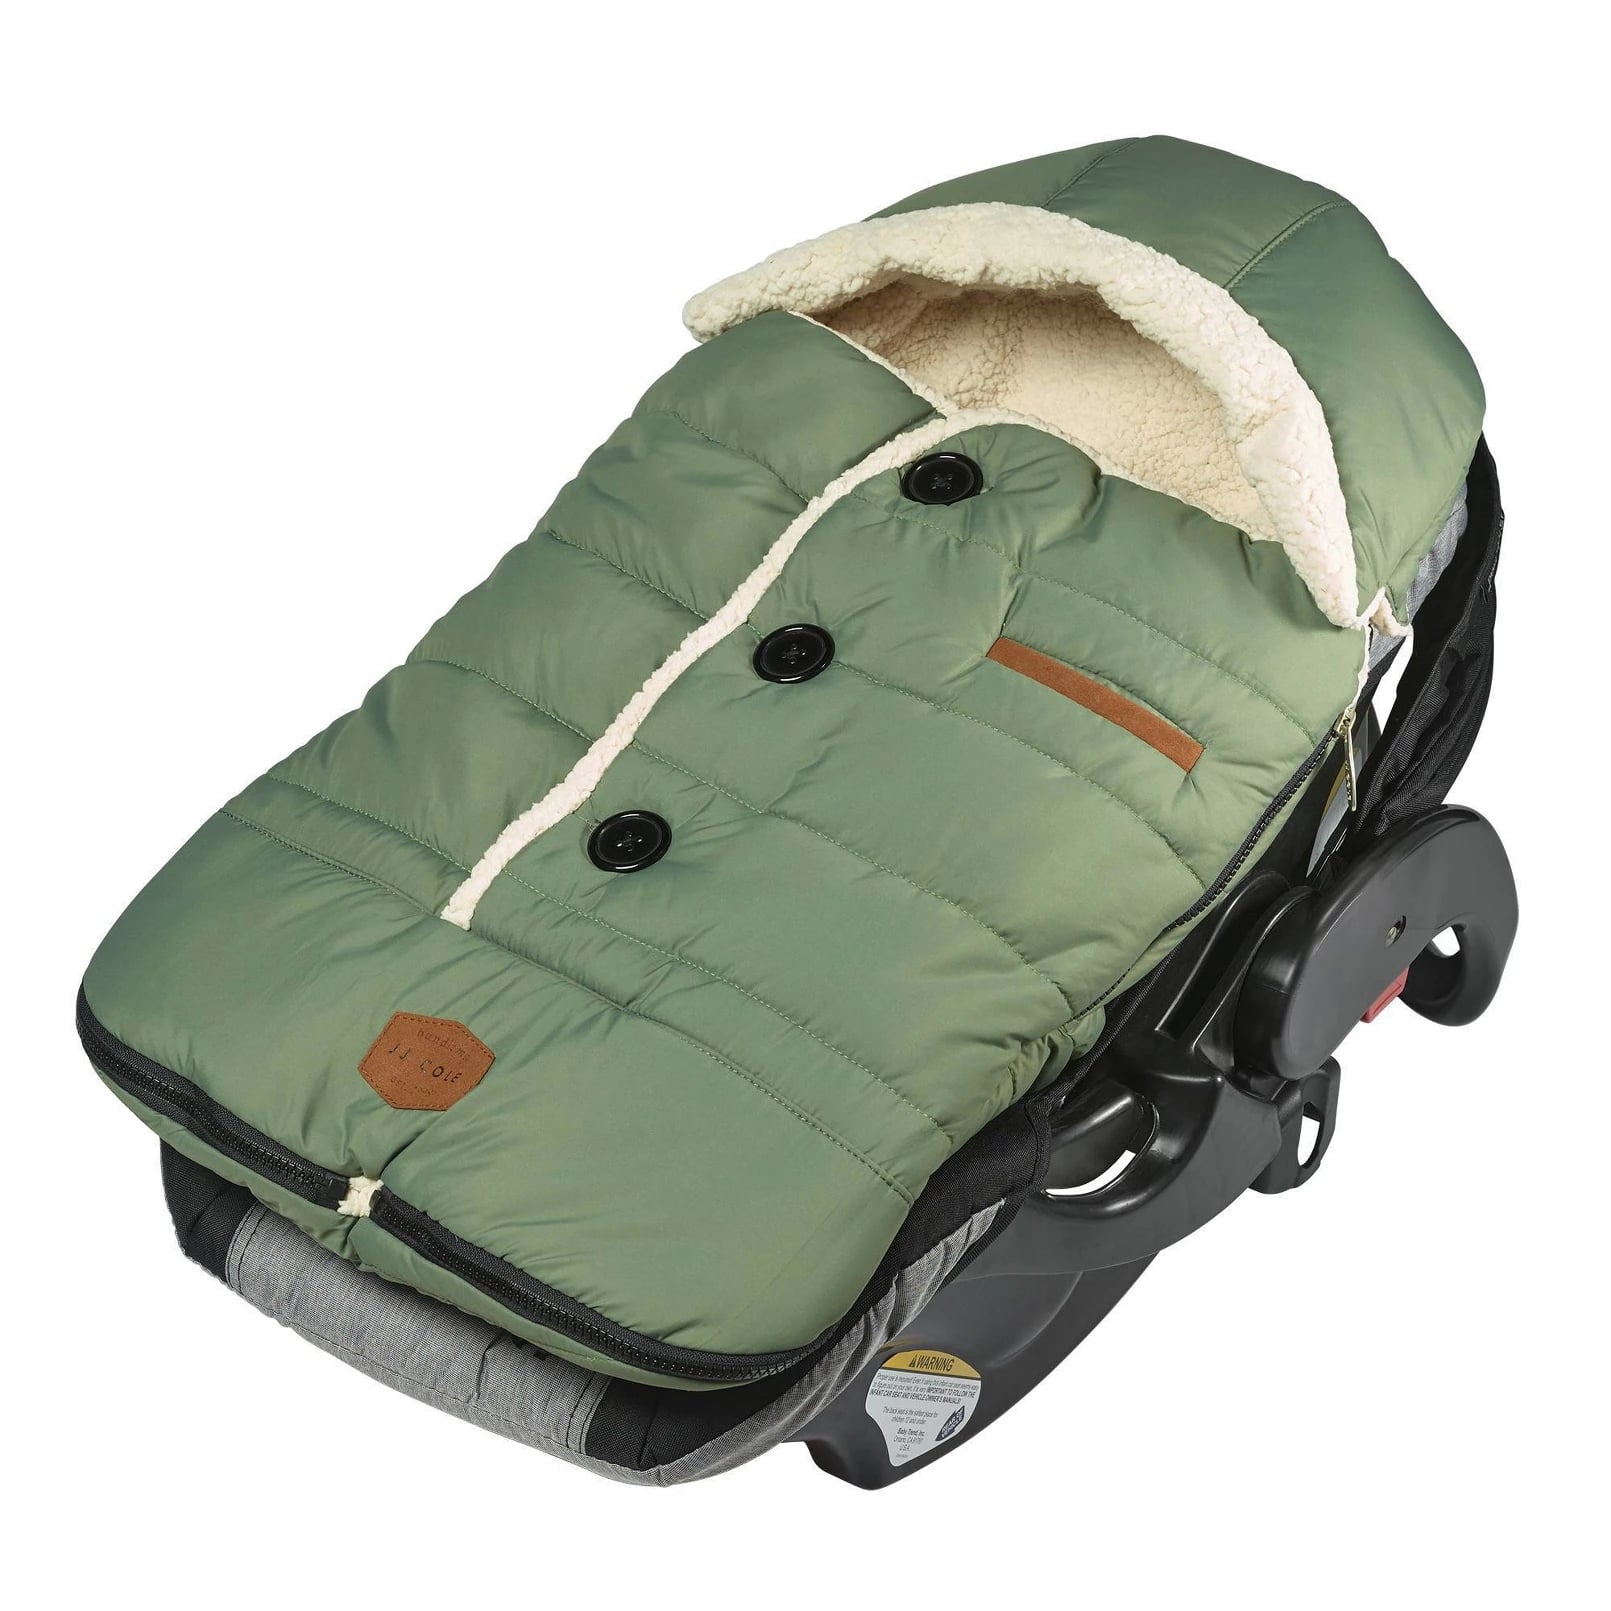 JJ Cole Bundle Me Urban Car Seat Accessory, 6 Coats That Can be Worn  Safely in a Car Seat